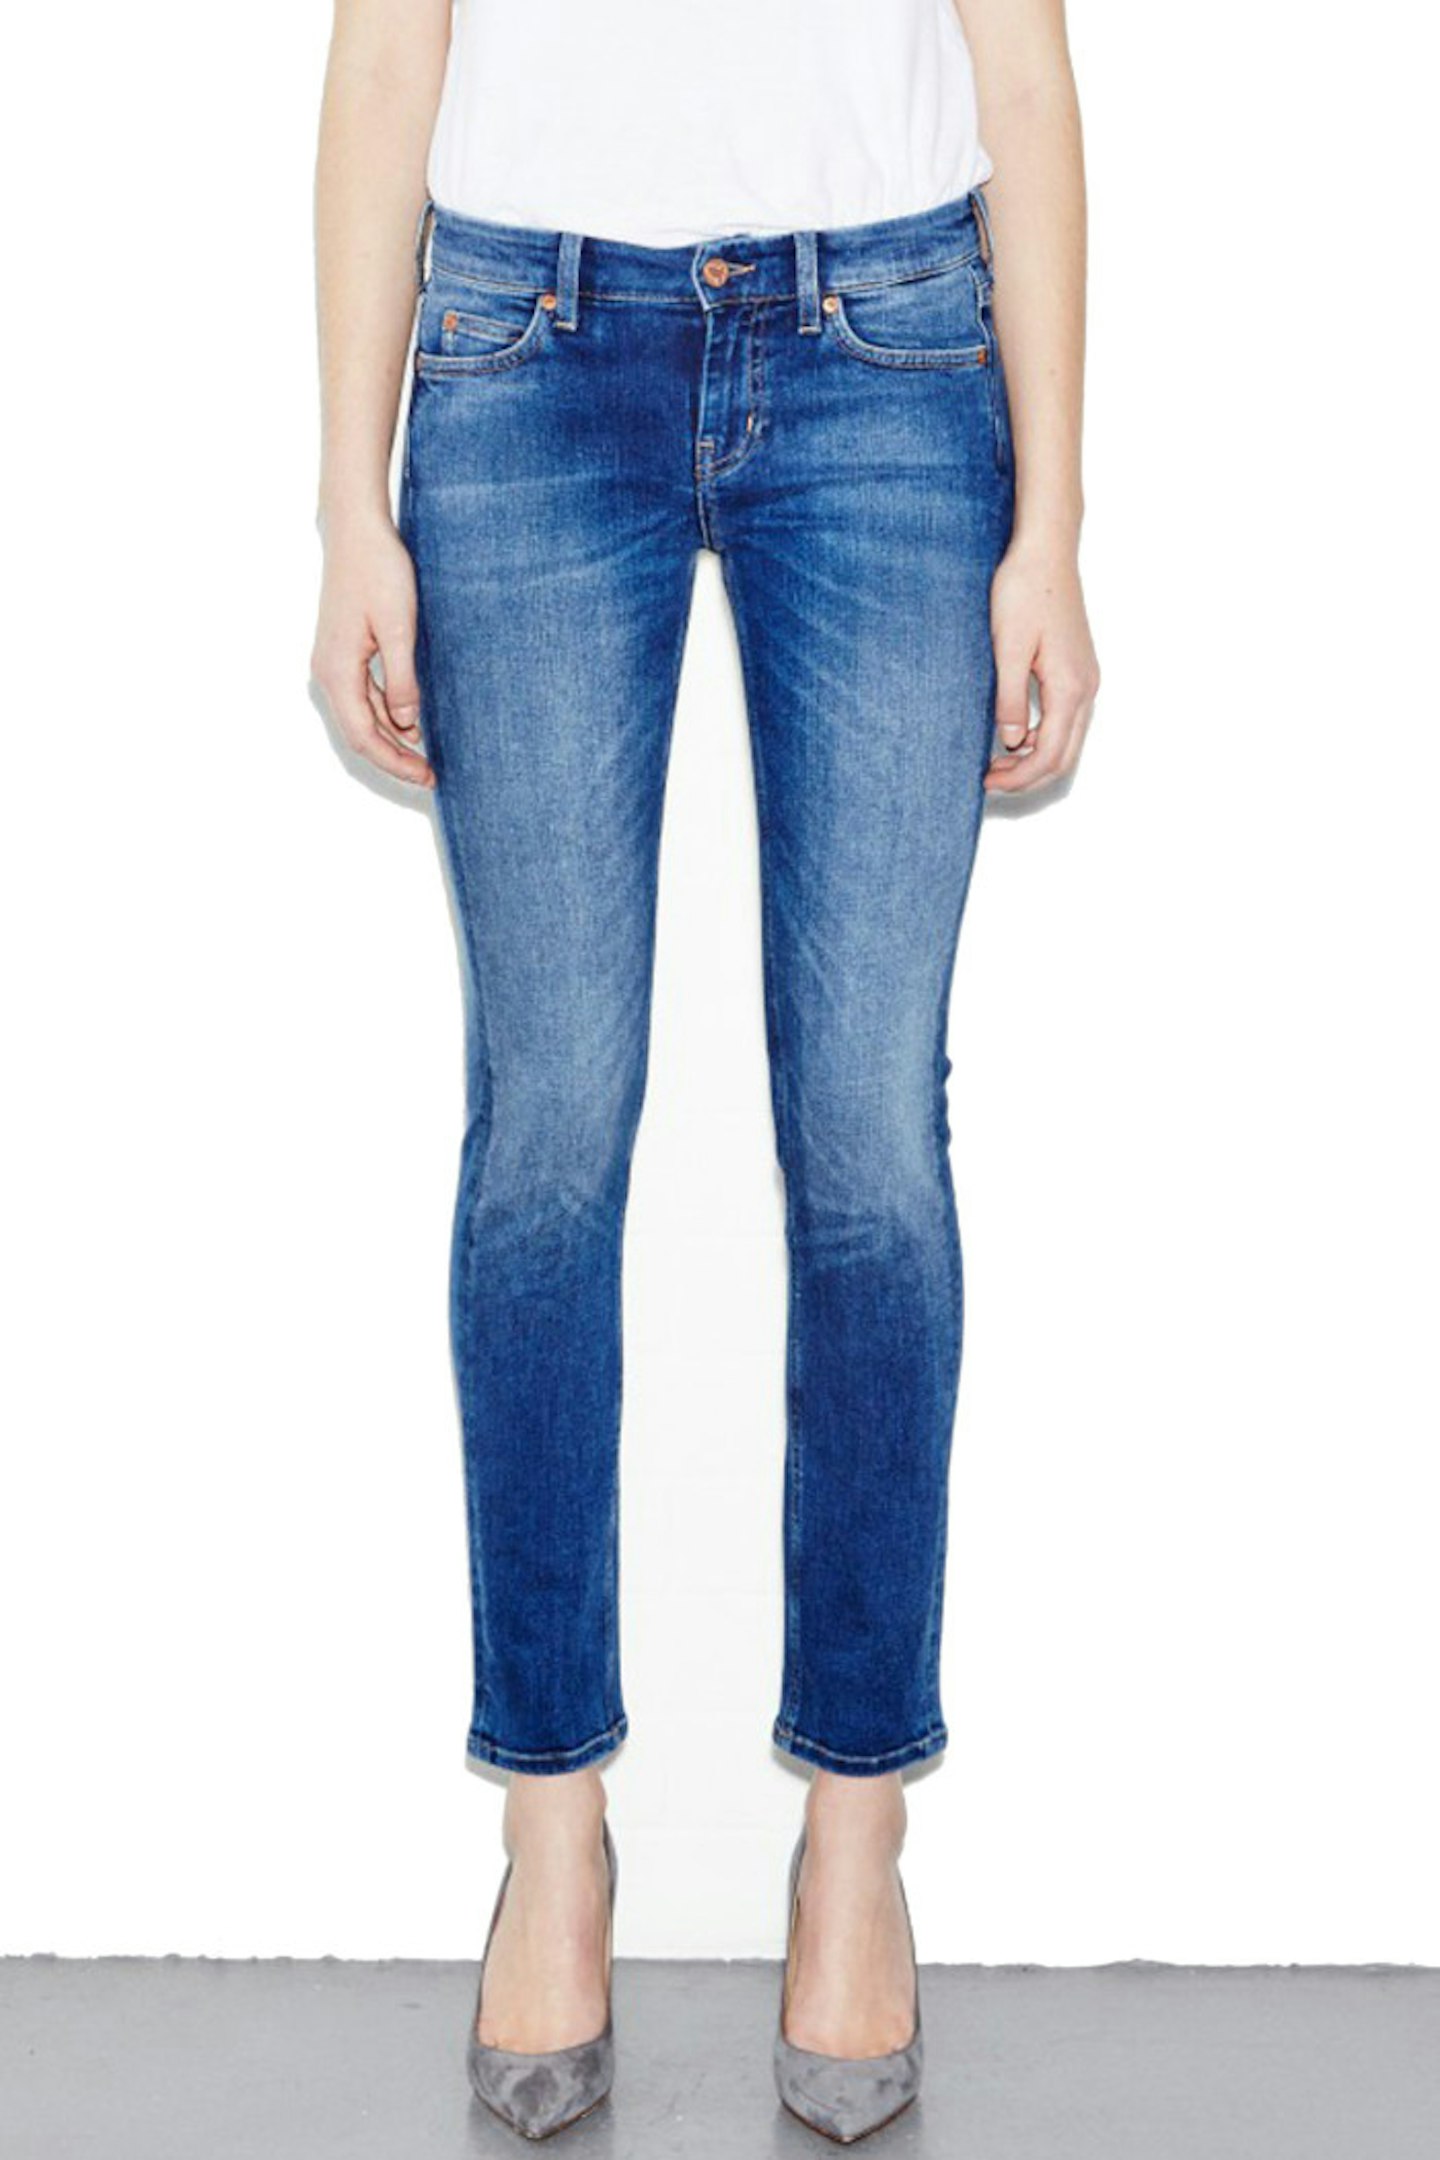 MIH Breathless Jeans, £190.00